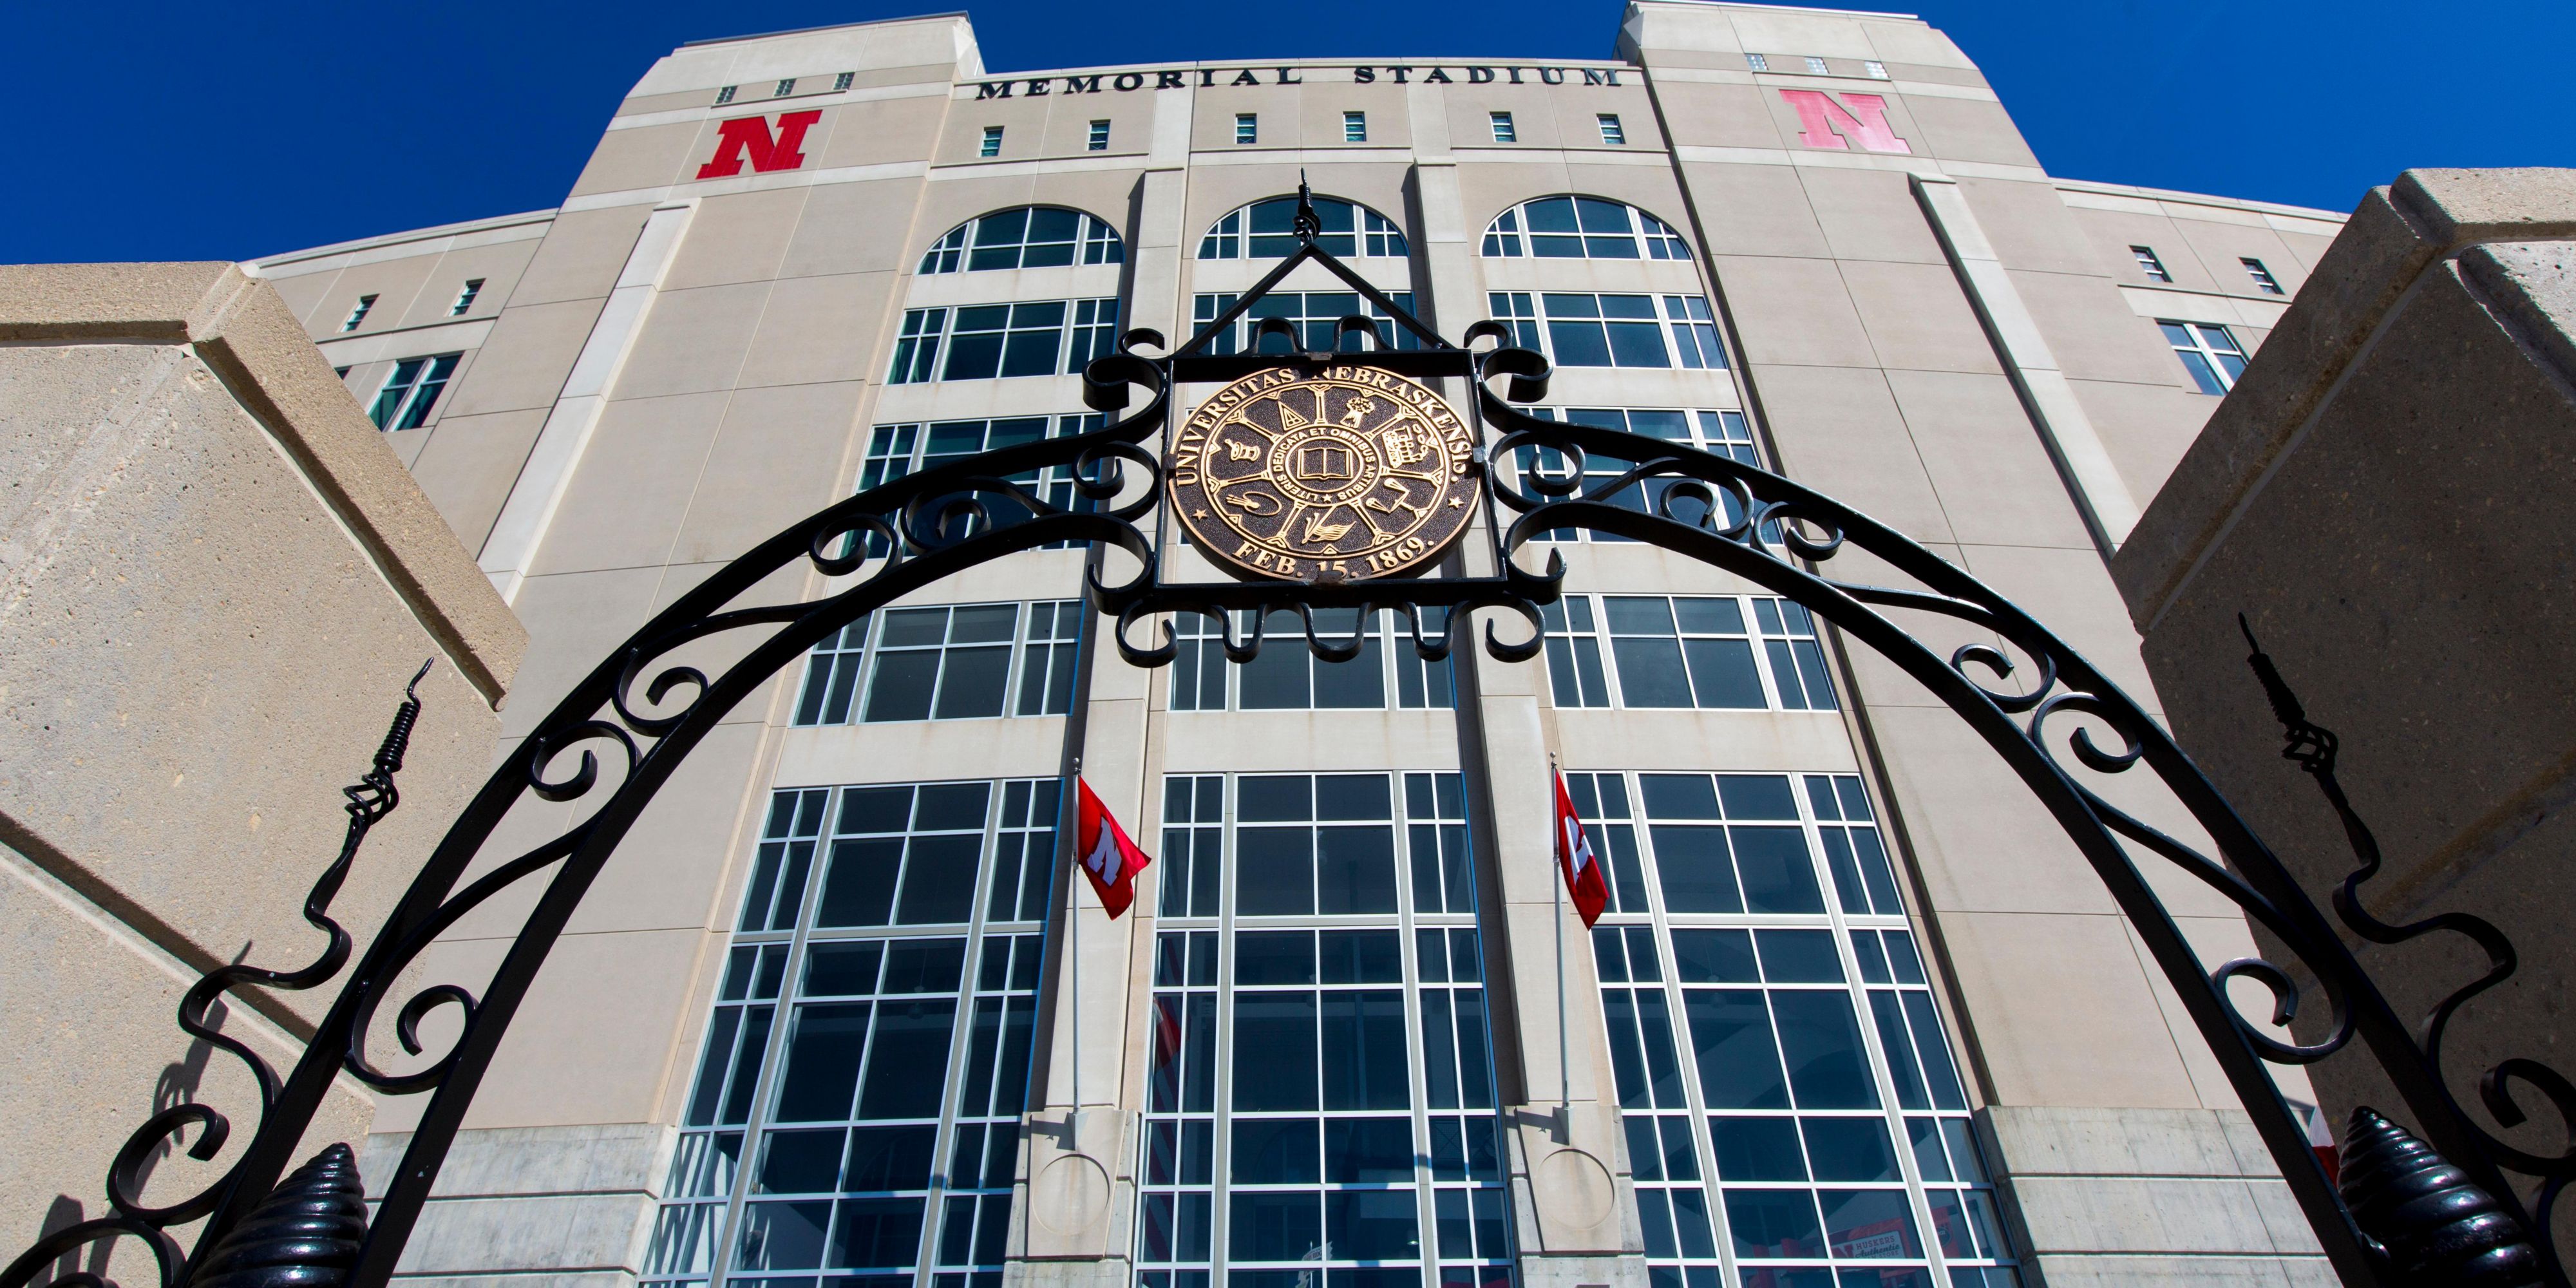 Located near Memorial Stadium on the campus of the University of Nebraska-Lincoln.  The stadium is home to the Cornhusker Football Team. 